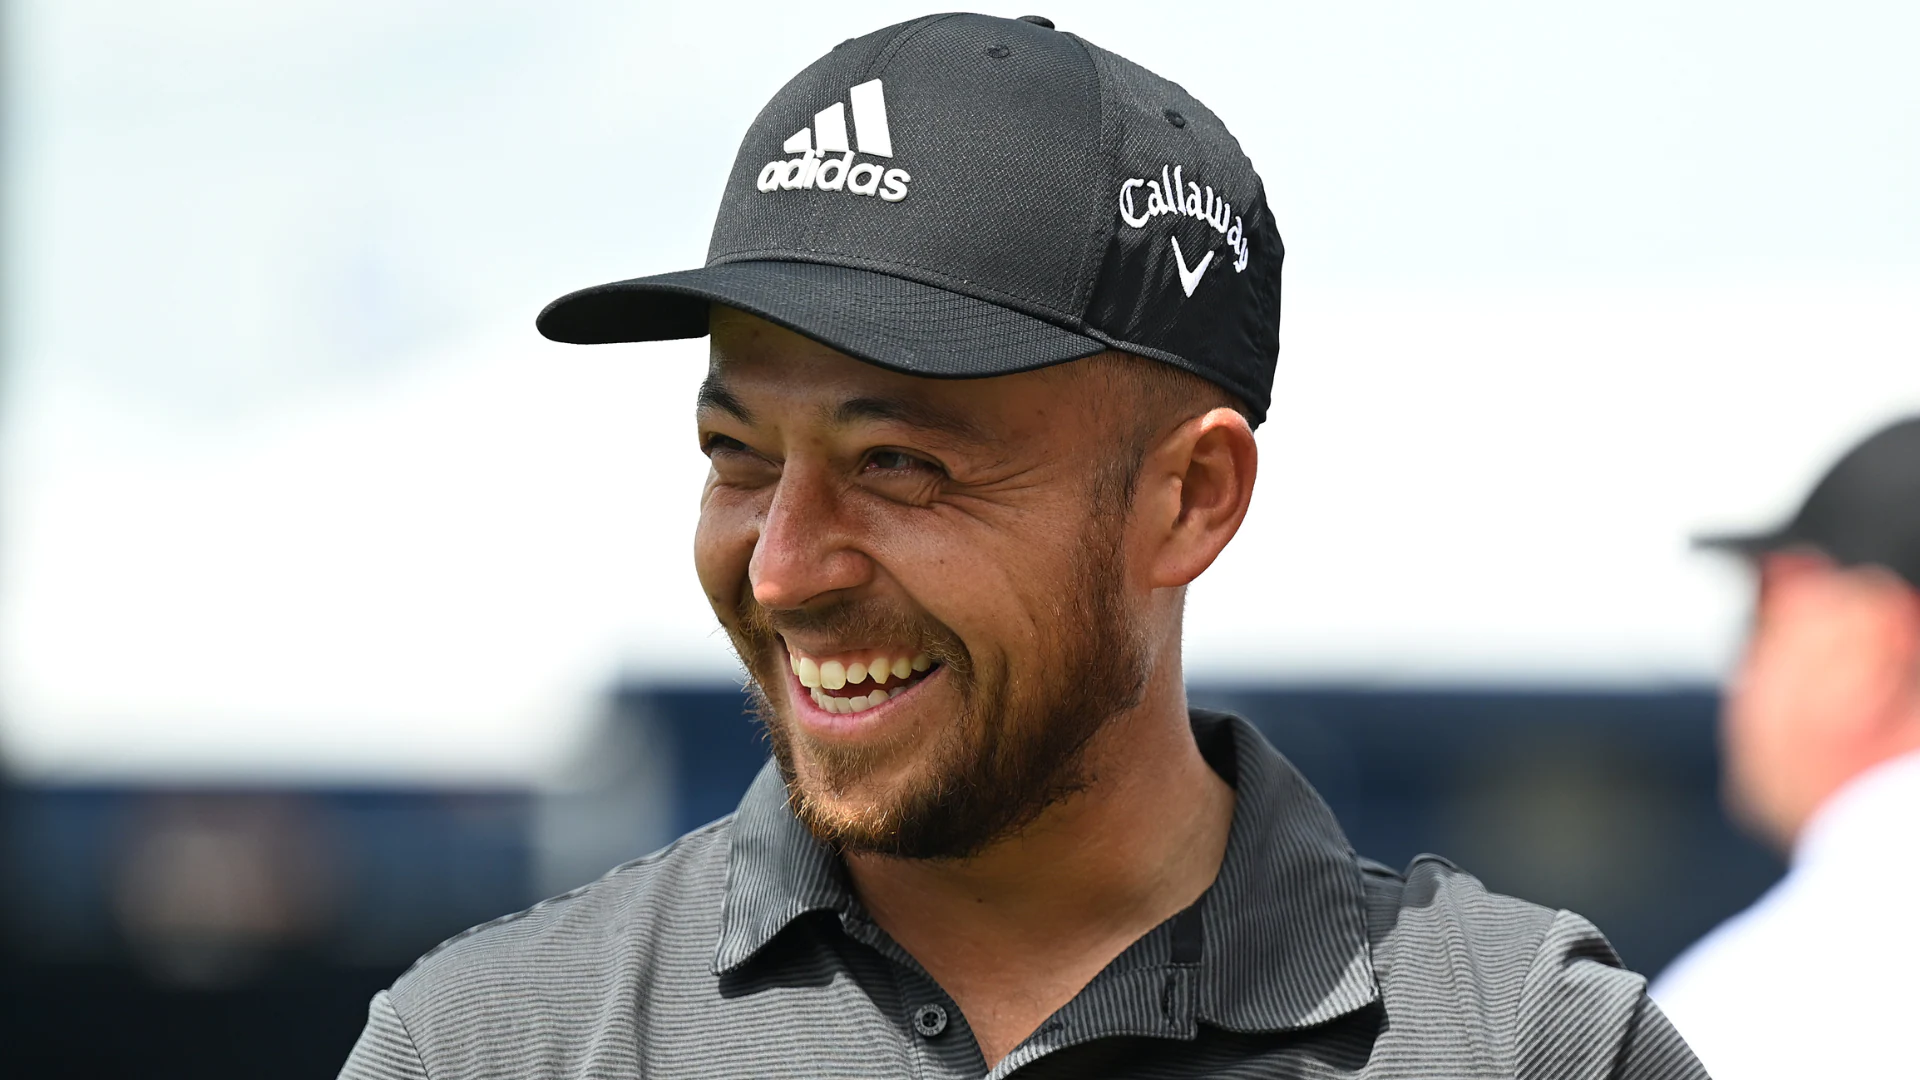 2022 British Open: After ’18 St. Andrews peek, Xander Schauffele now at Old Course as golf’s hottest player